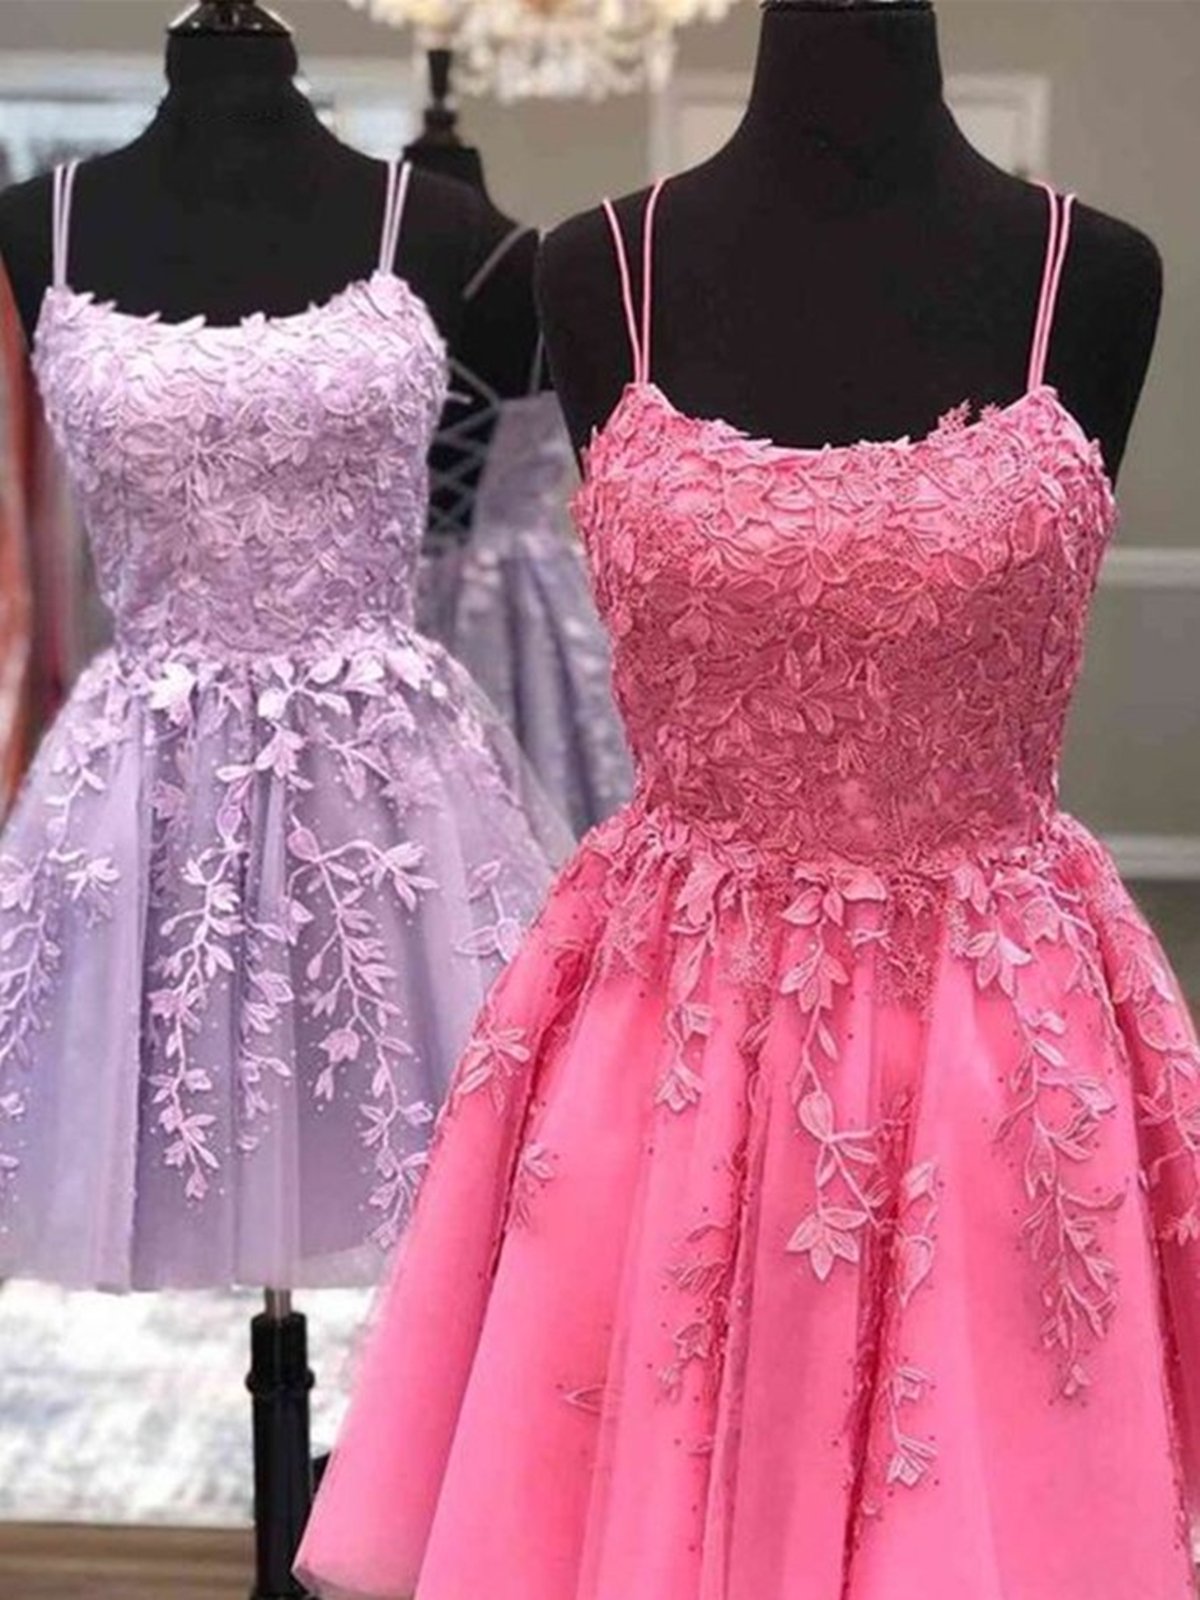 Party Dress Online Shopping, Thin Straps Short Purple Pink Lace Prom Dresses, Short Purple Pink Lace Graduation Homecoming Dresses